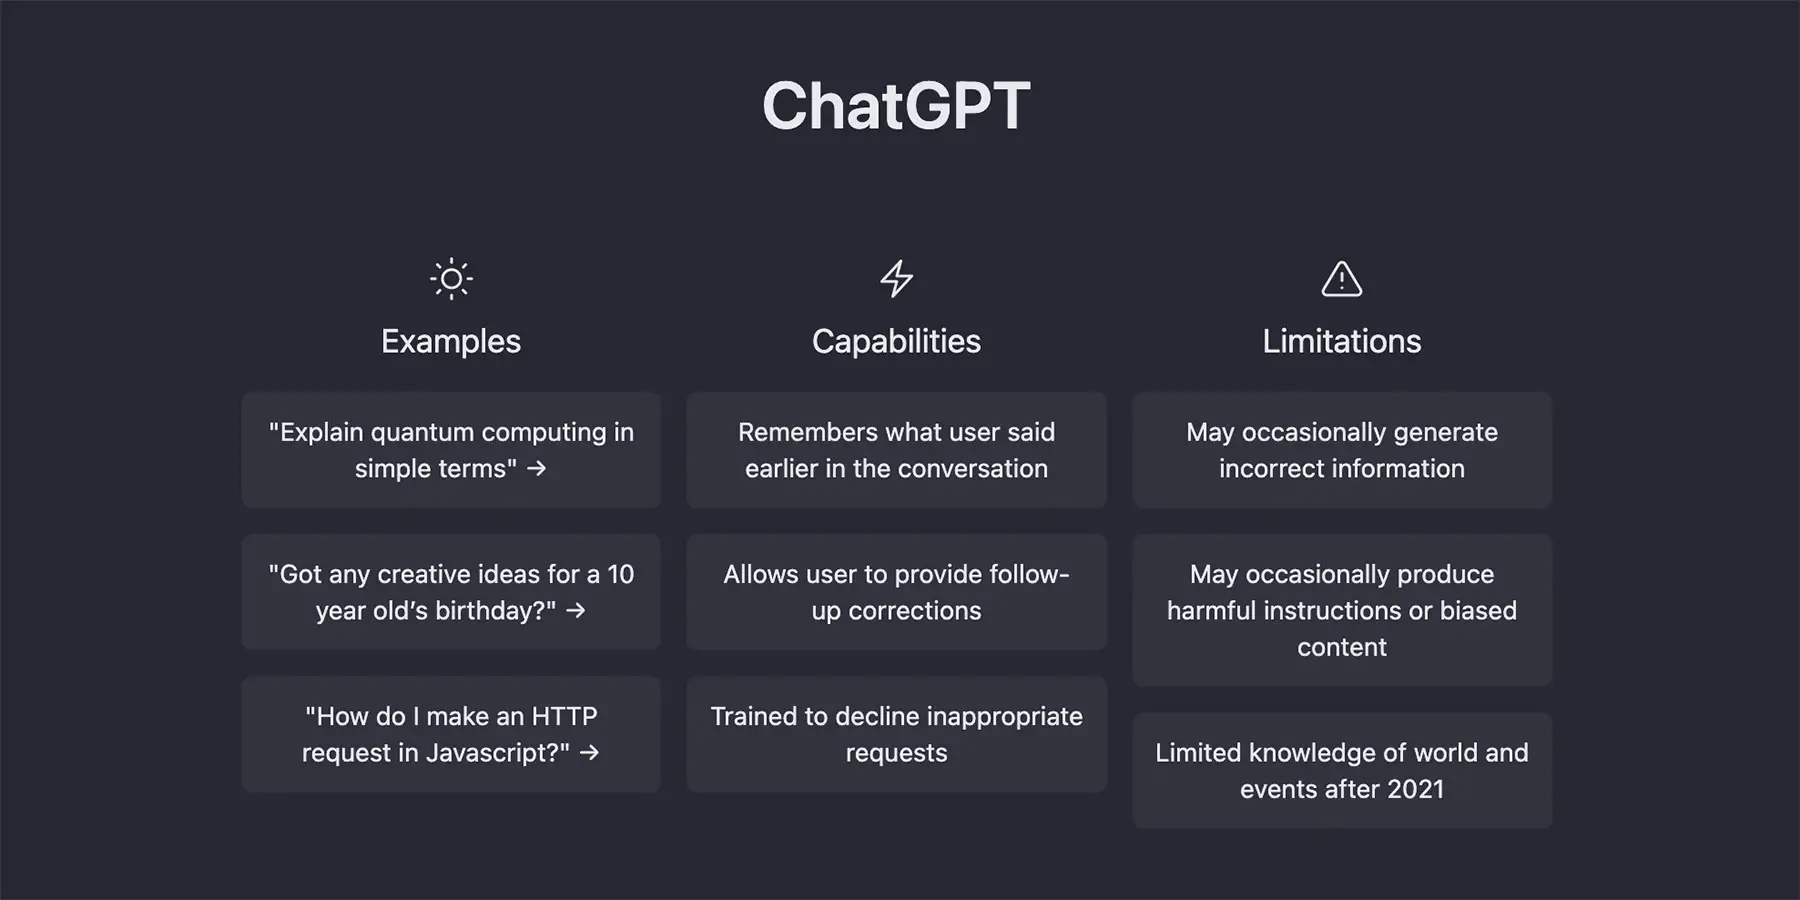 Strengths and Limitations of ChatGPT